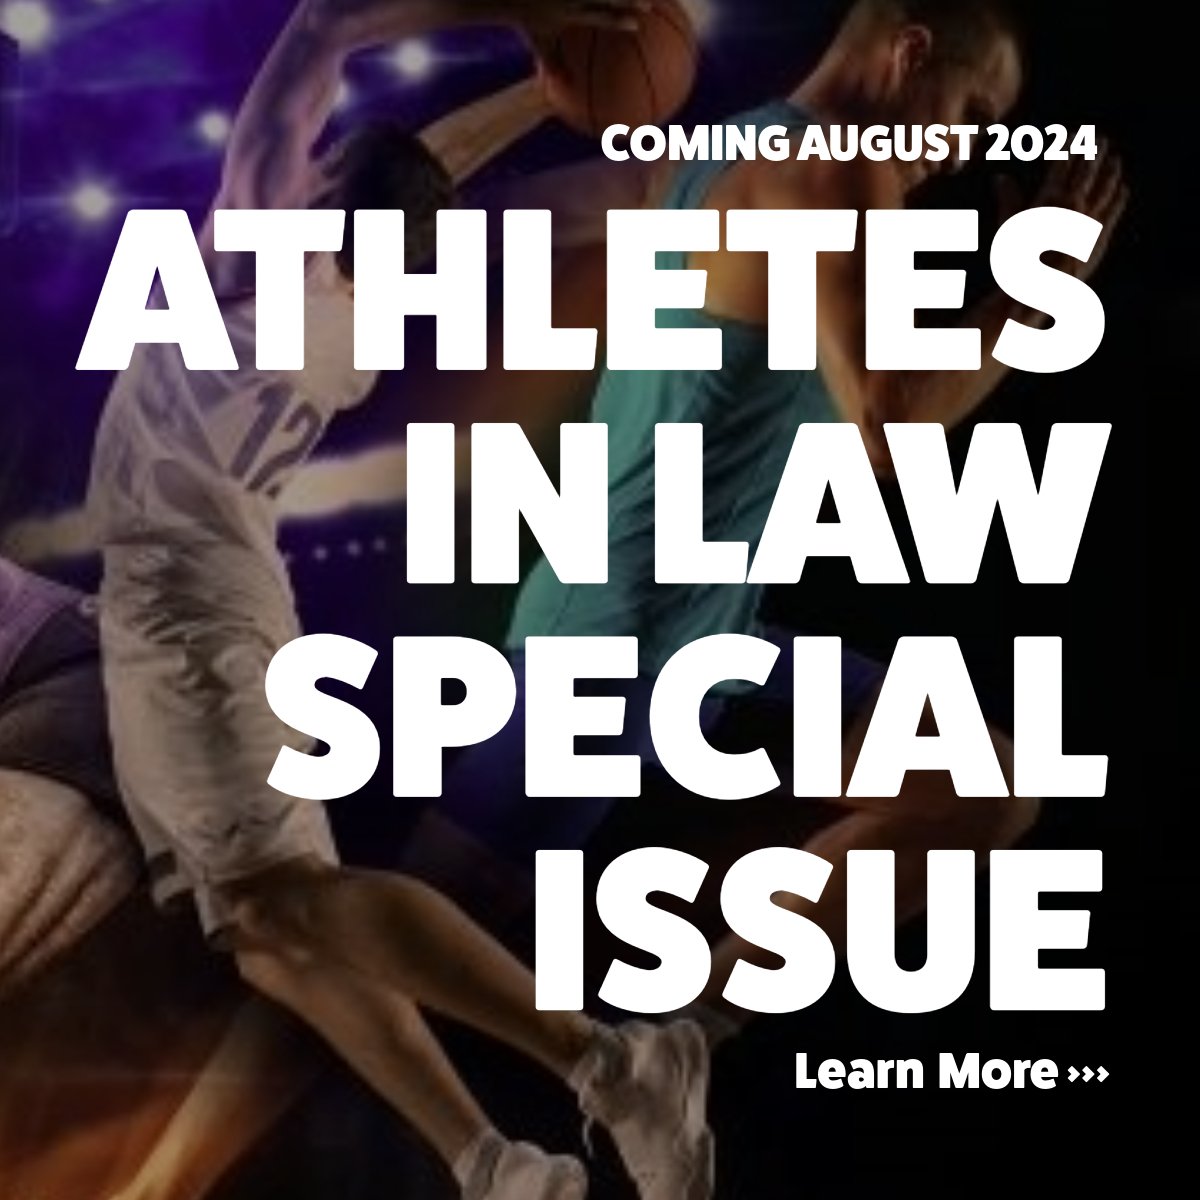 Athletes in Law Special Issue